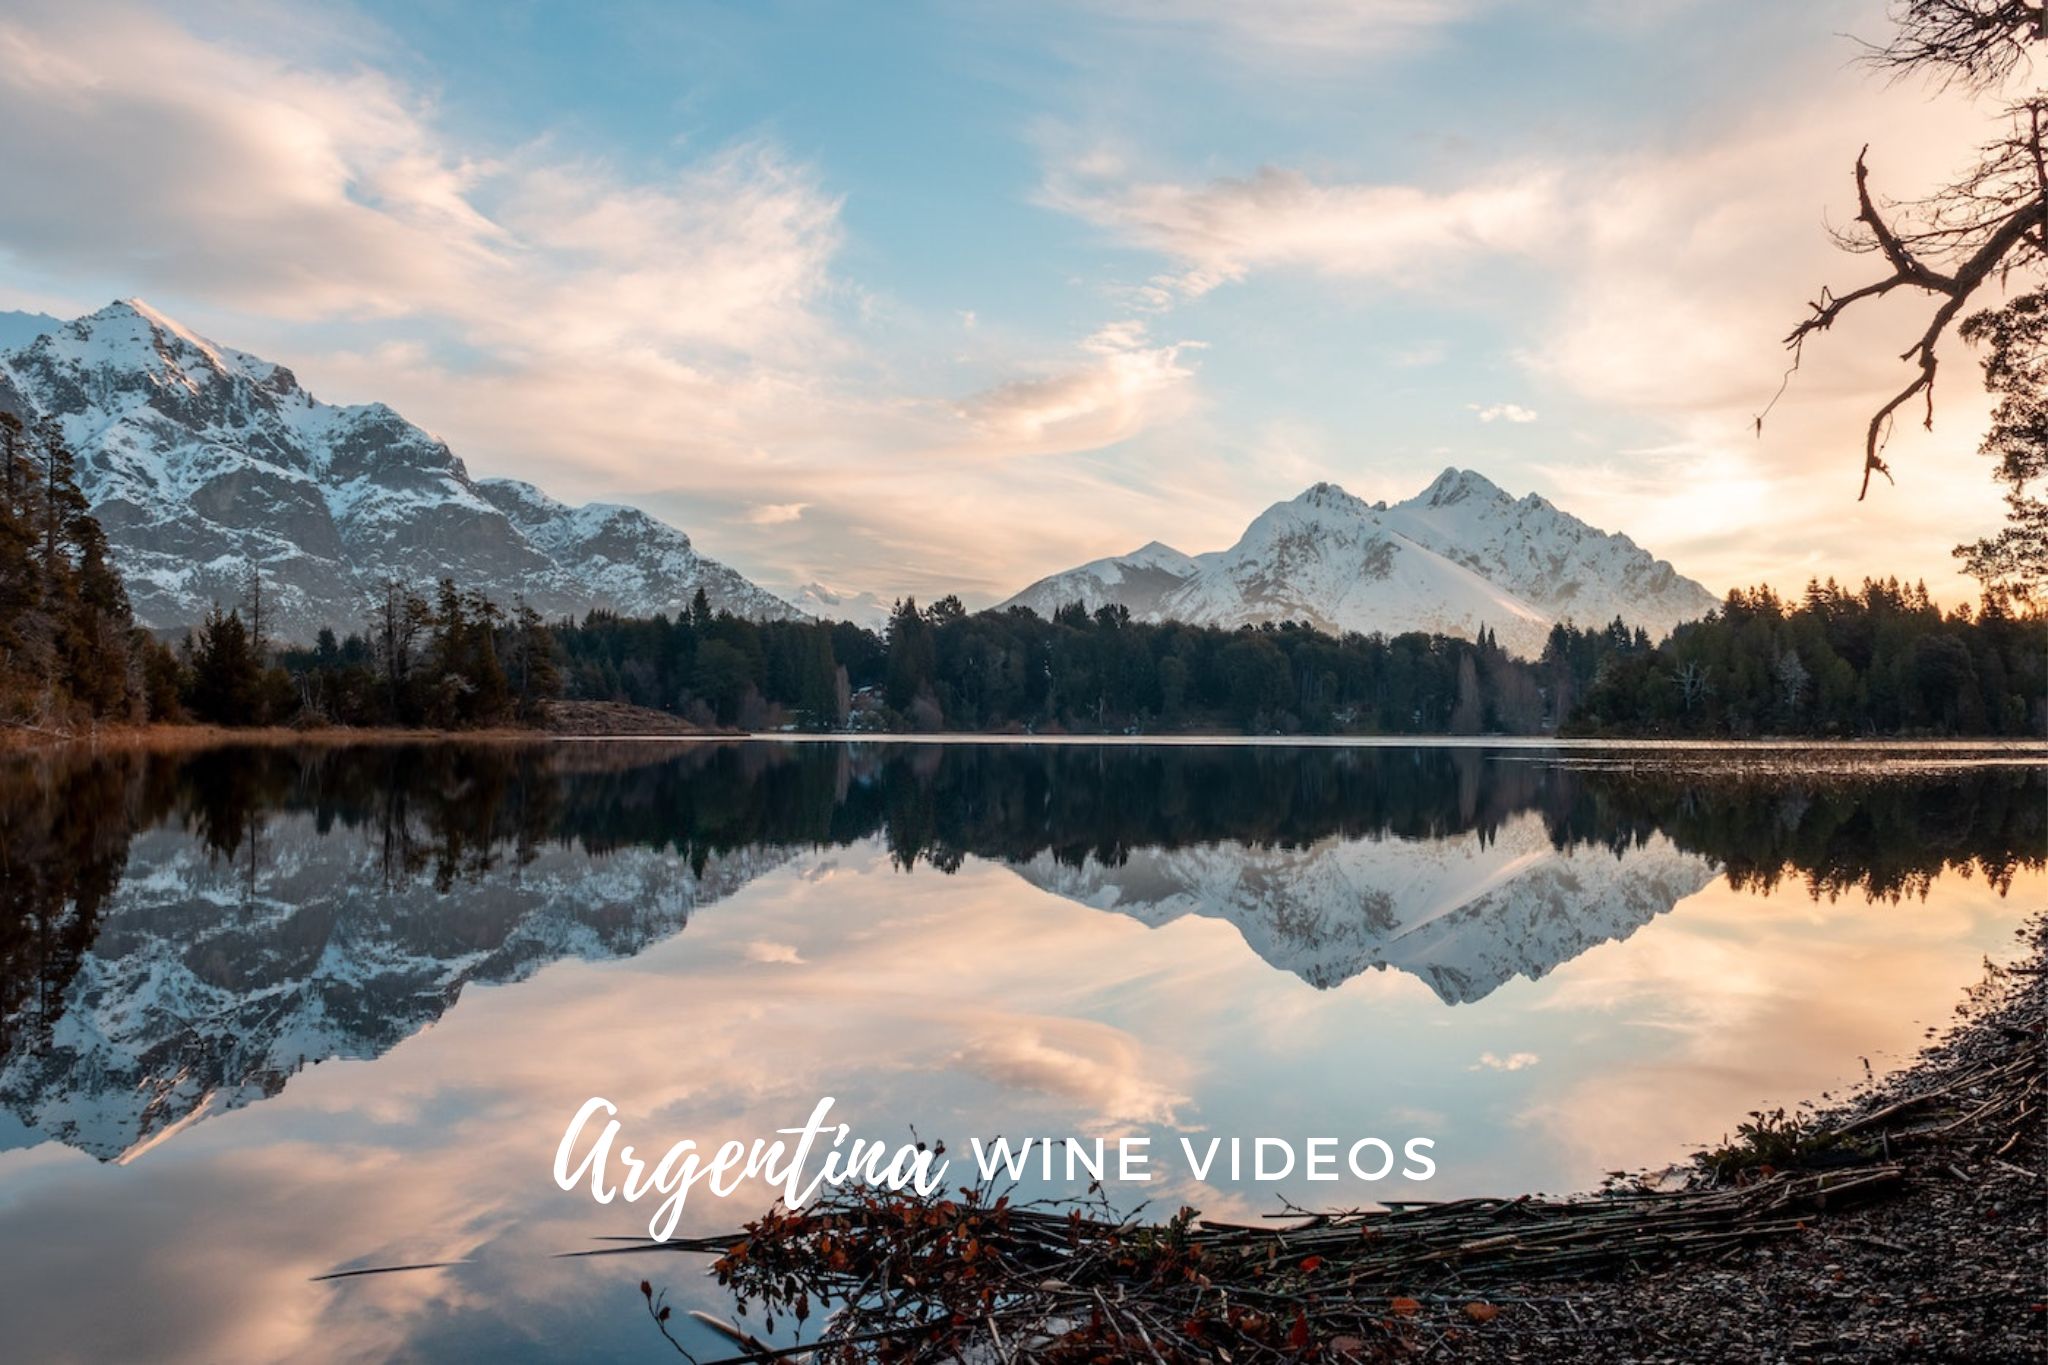 Discover our video guide to the wine regions of Argentina